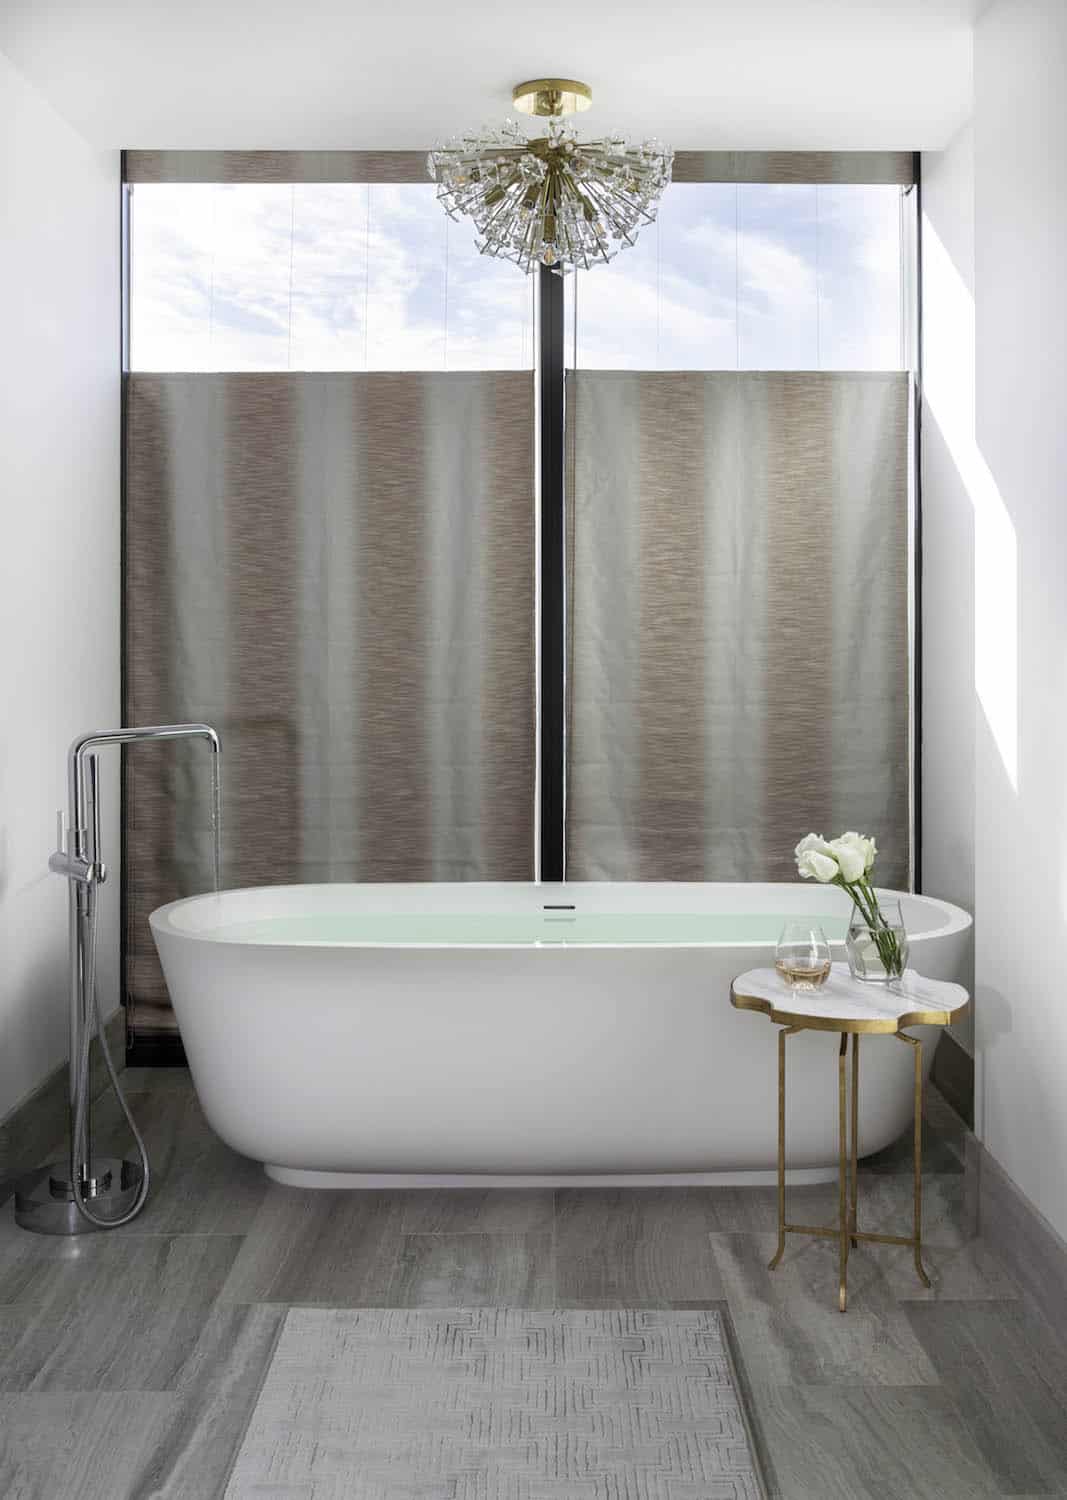 We used this Apaiser soaking tub in a recent project, as shown here